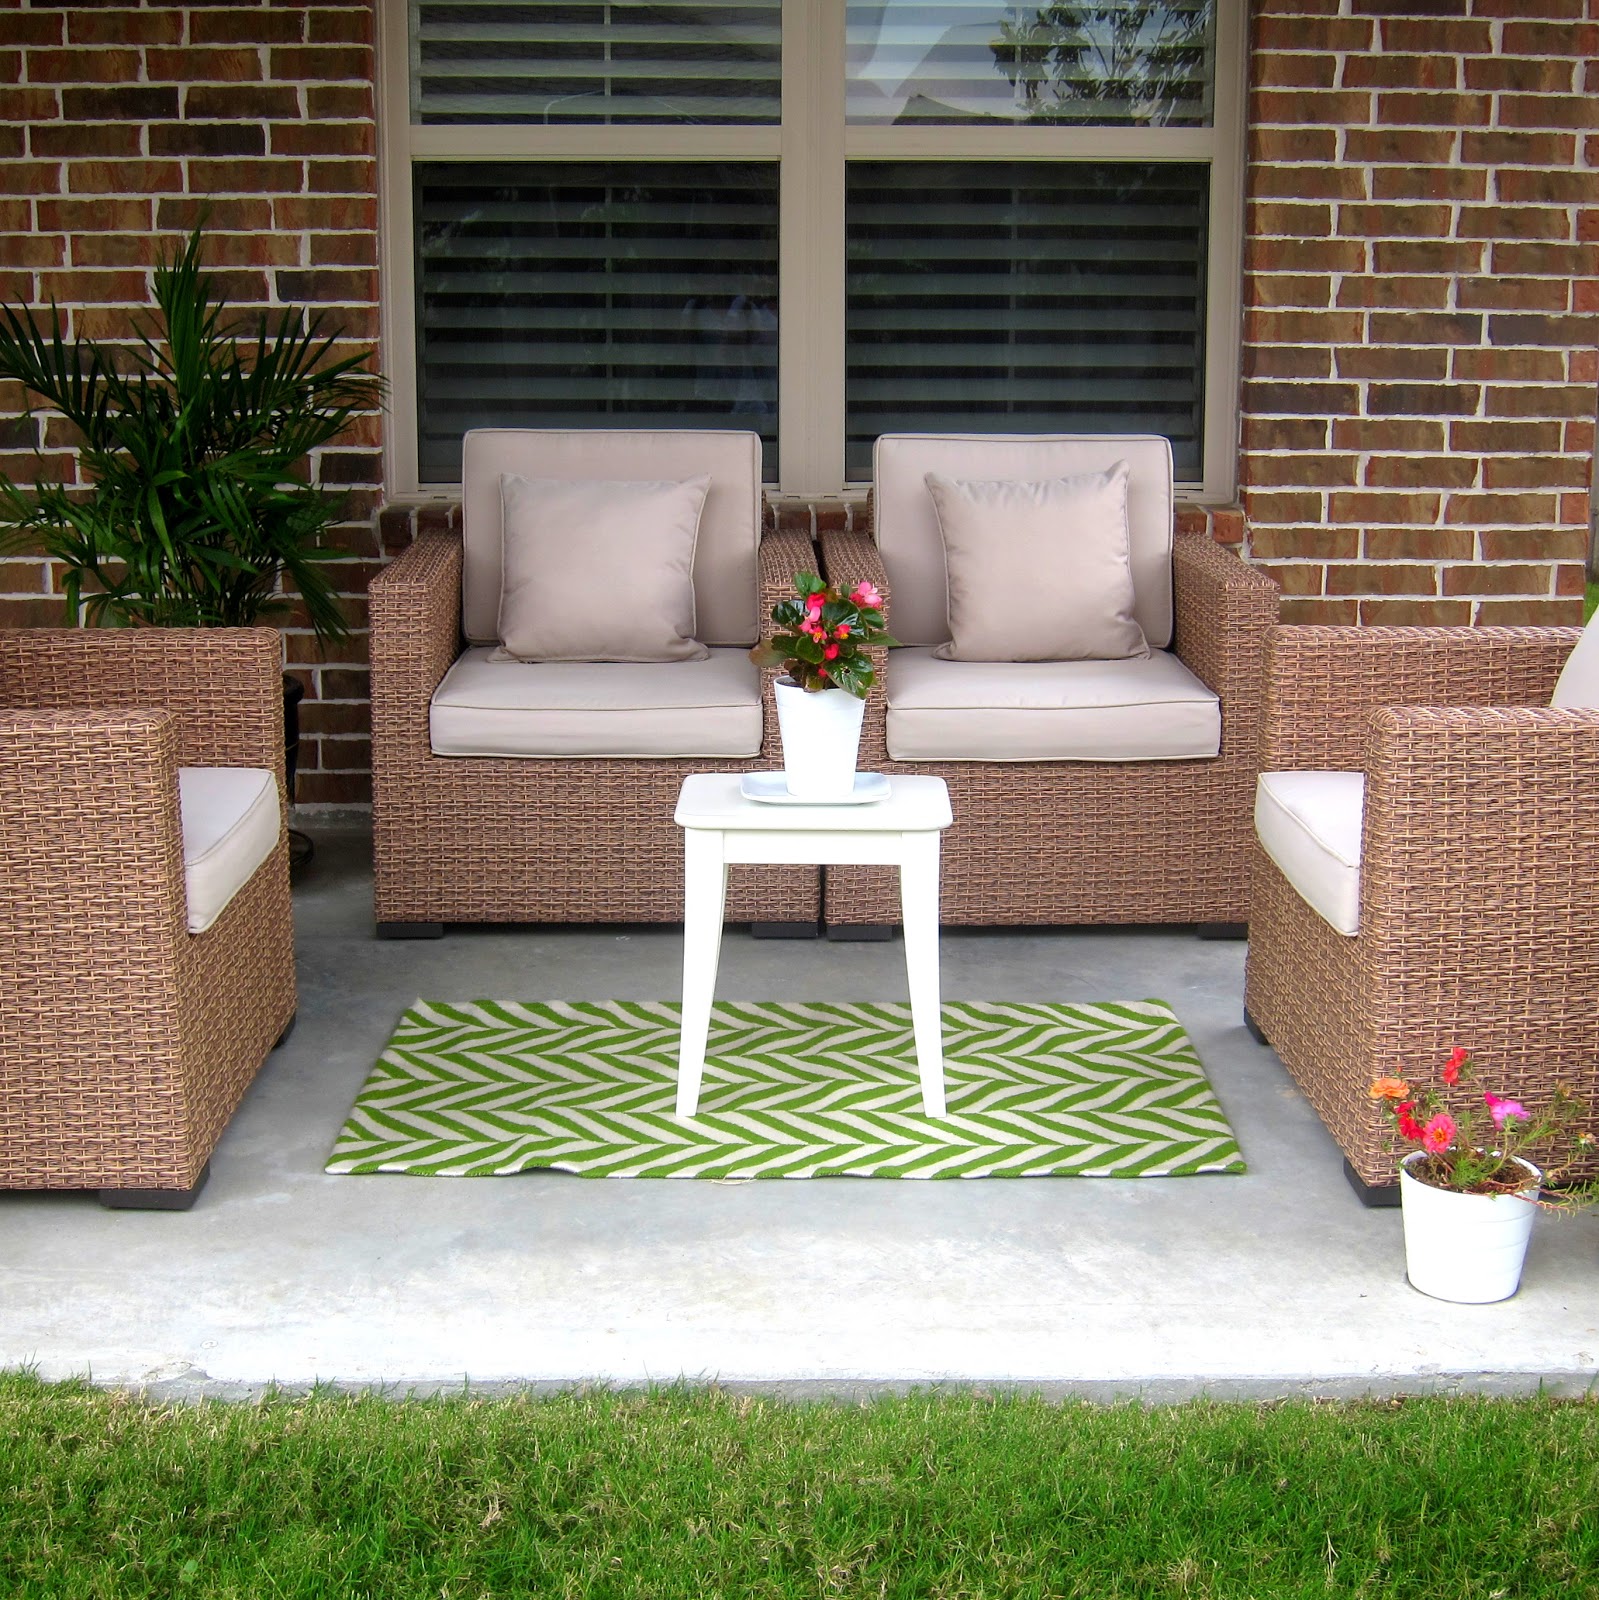 decor ideas patio rugs elegant wicker patio furniture with cushions and OKQENUV